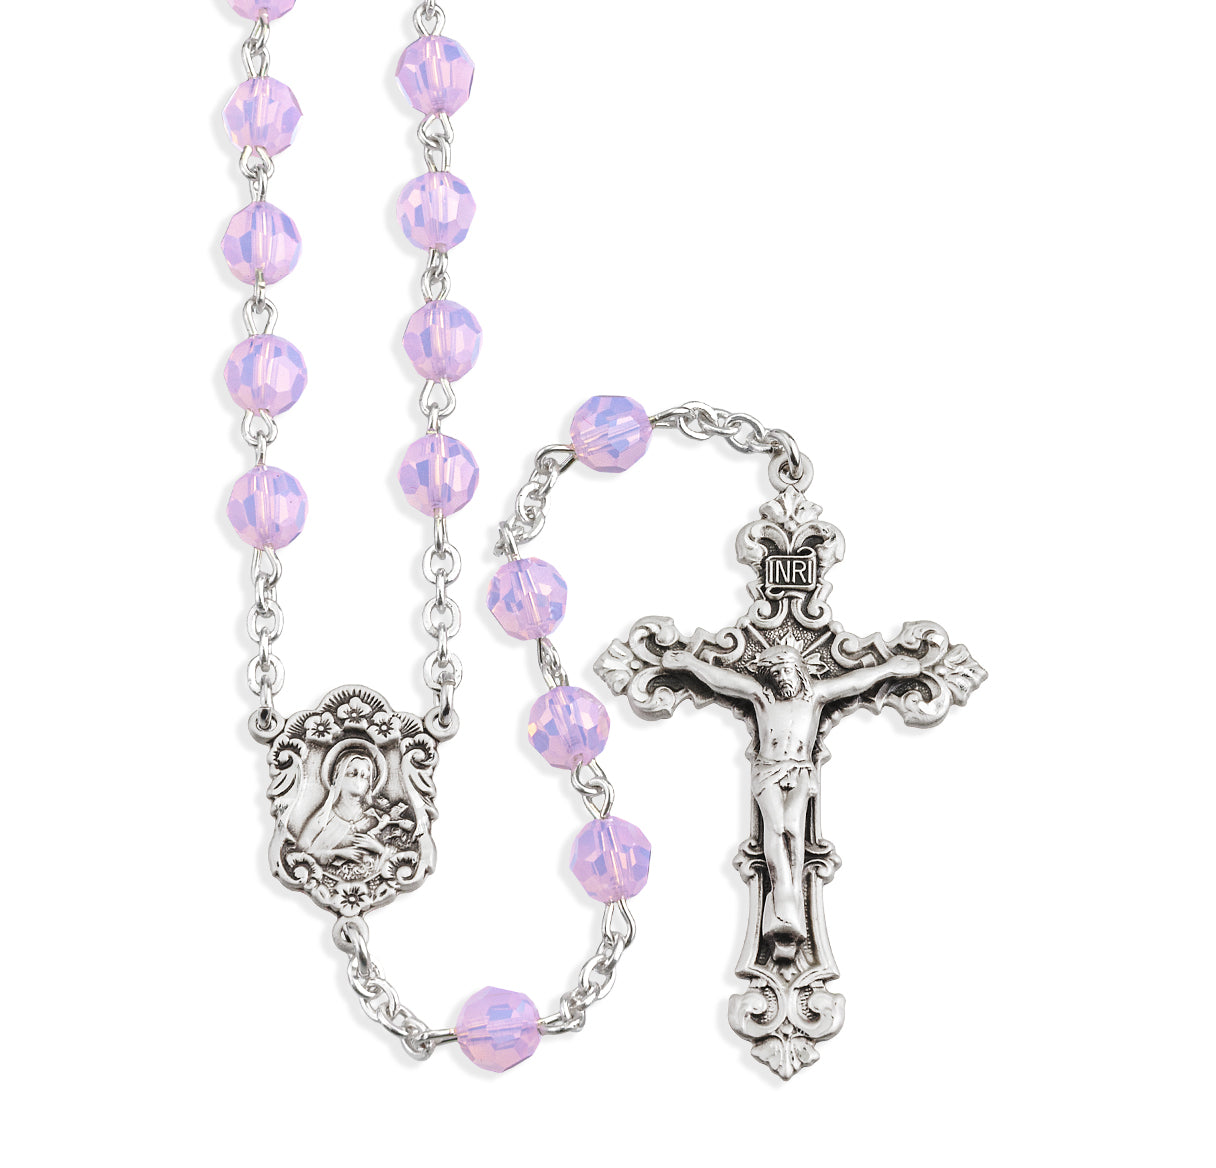 Sterling Silver Rosary Hand Made with Swarovski Crystal 6mm Rose Opal Faceted Round Beads by HMH